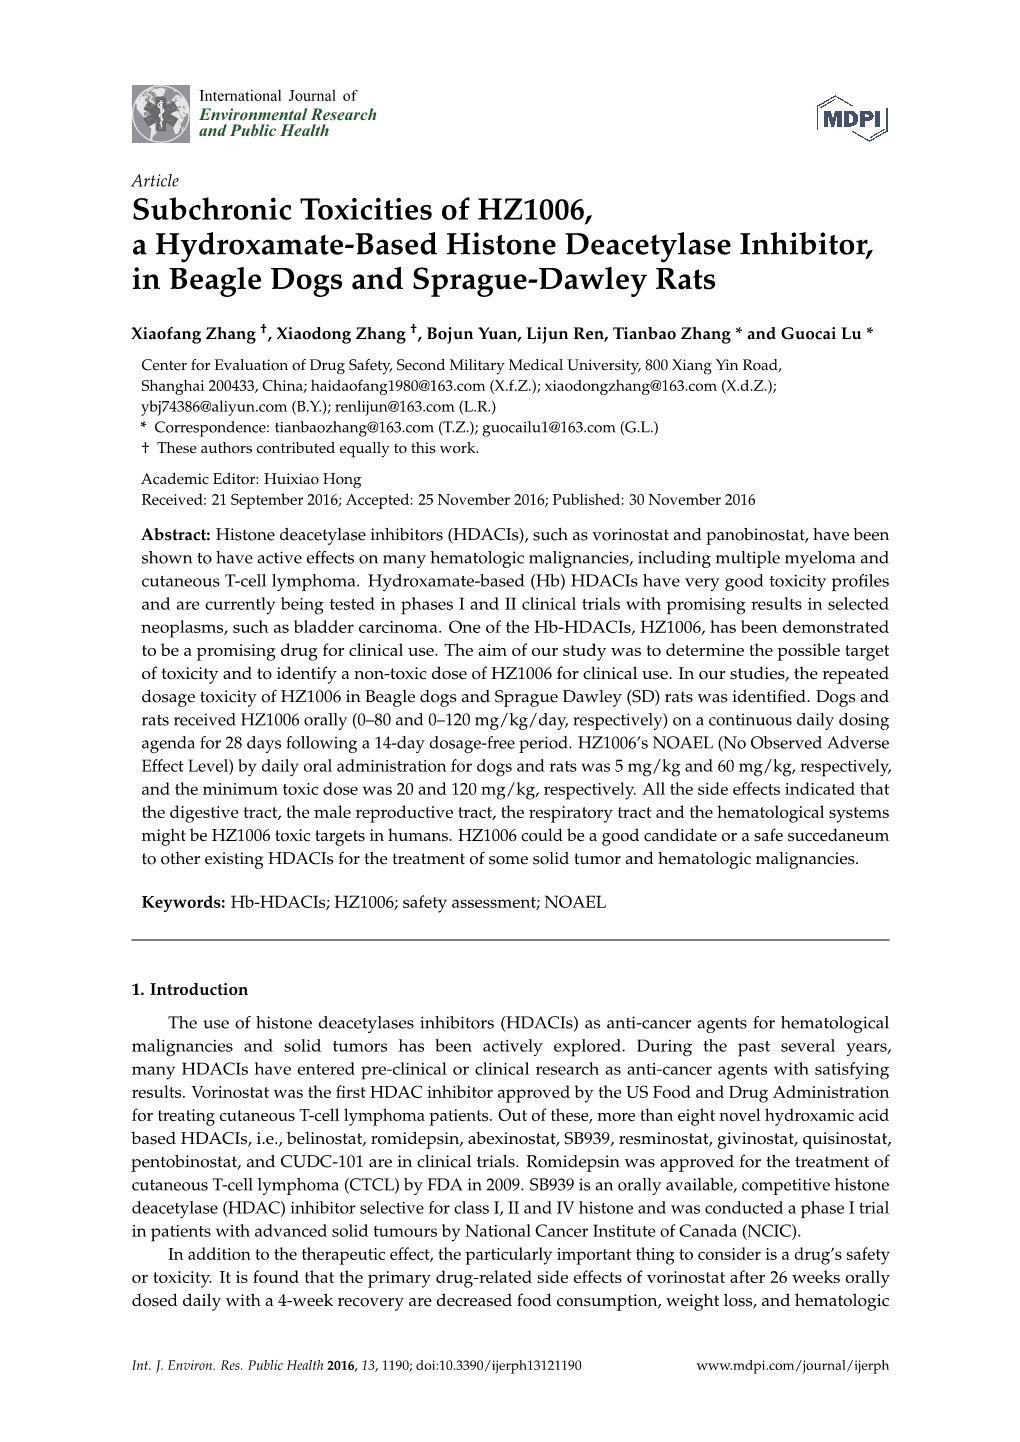 Subchronic Toxicities of HZ1006, a Hydroxamate-Based Histone Deacetylase Inhibitor, in Beagle Dogs and Sprague-Dawley Rats